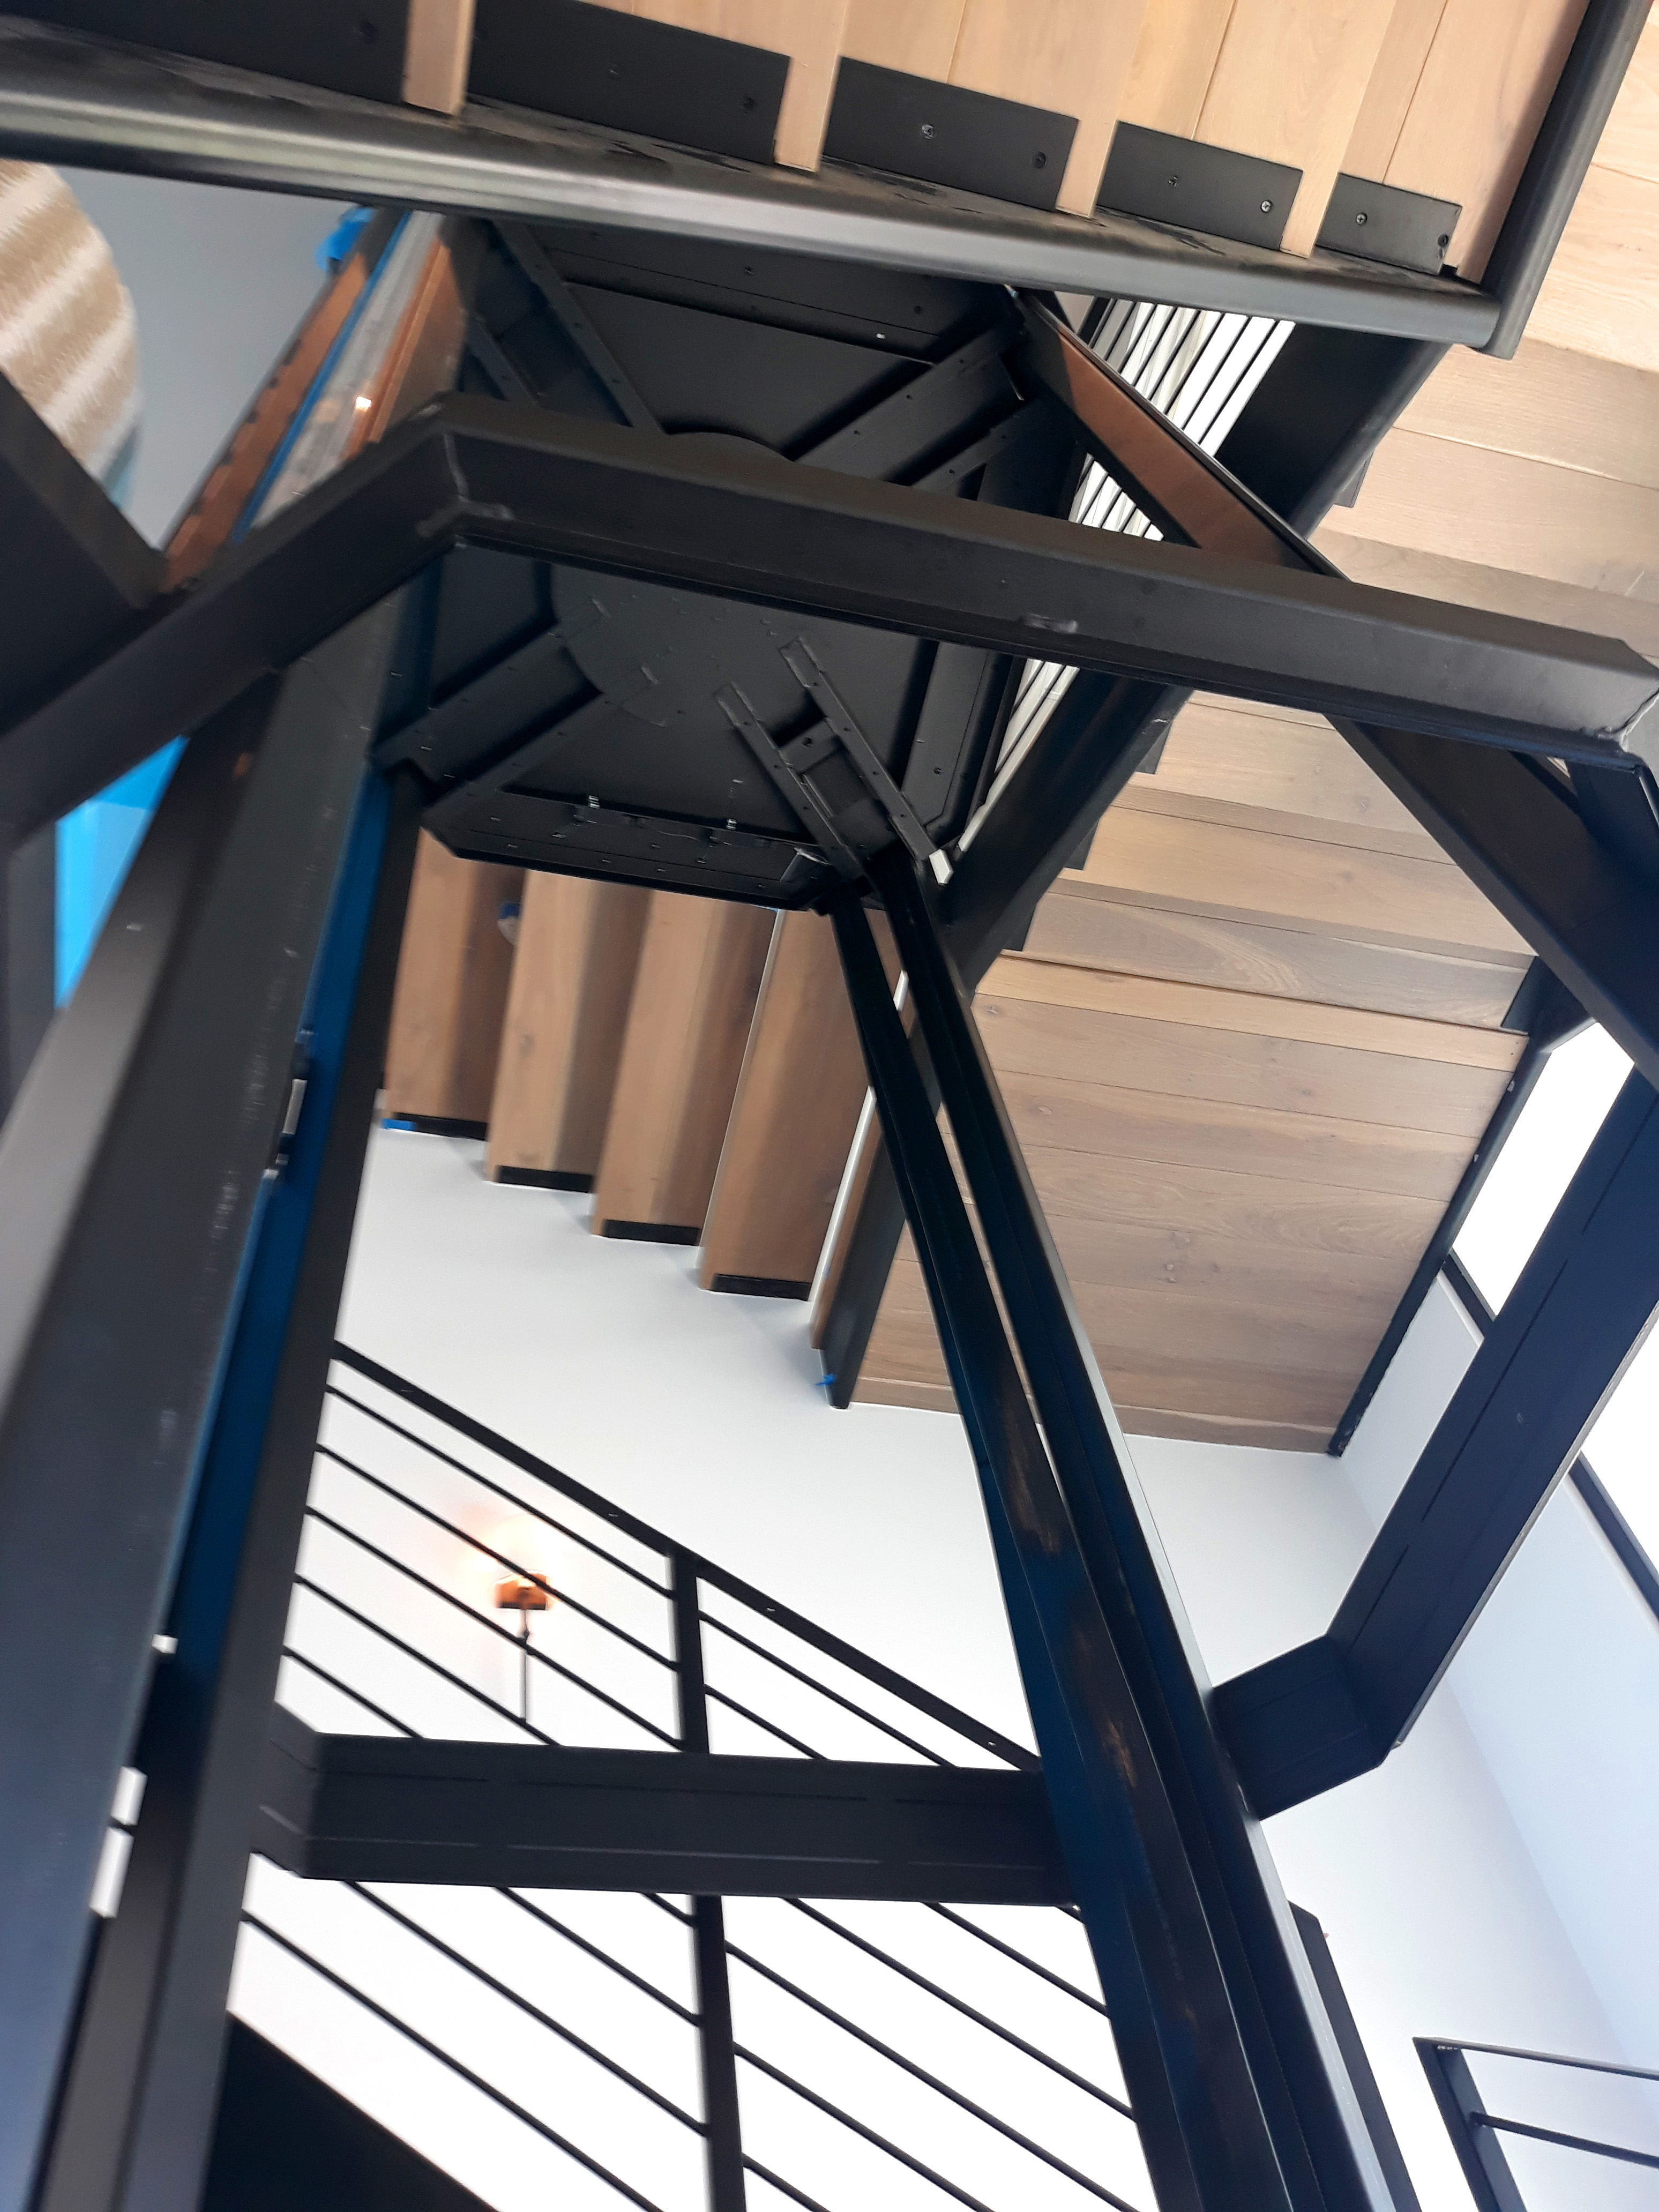 The steel frame of the integrated hoistway being installed within the winding staircase.